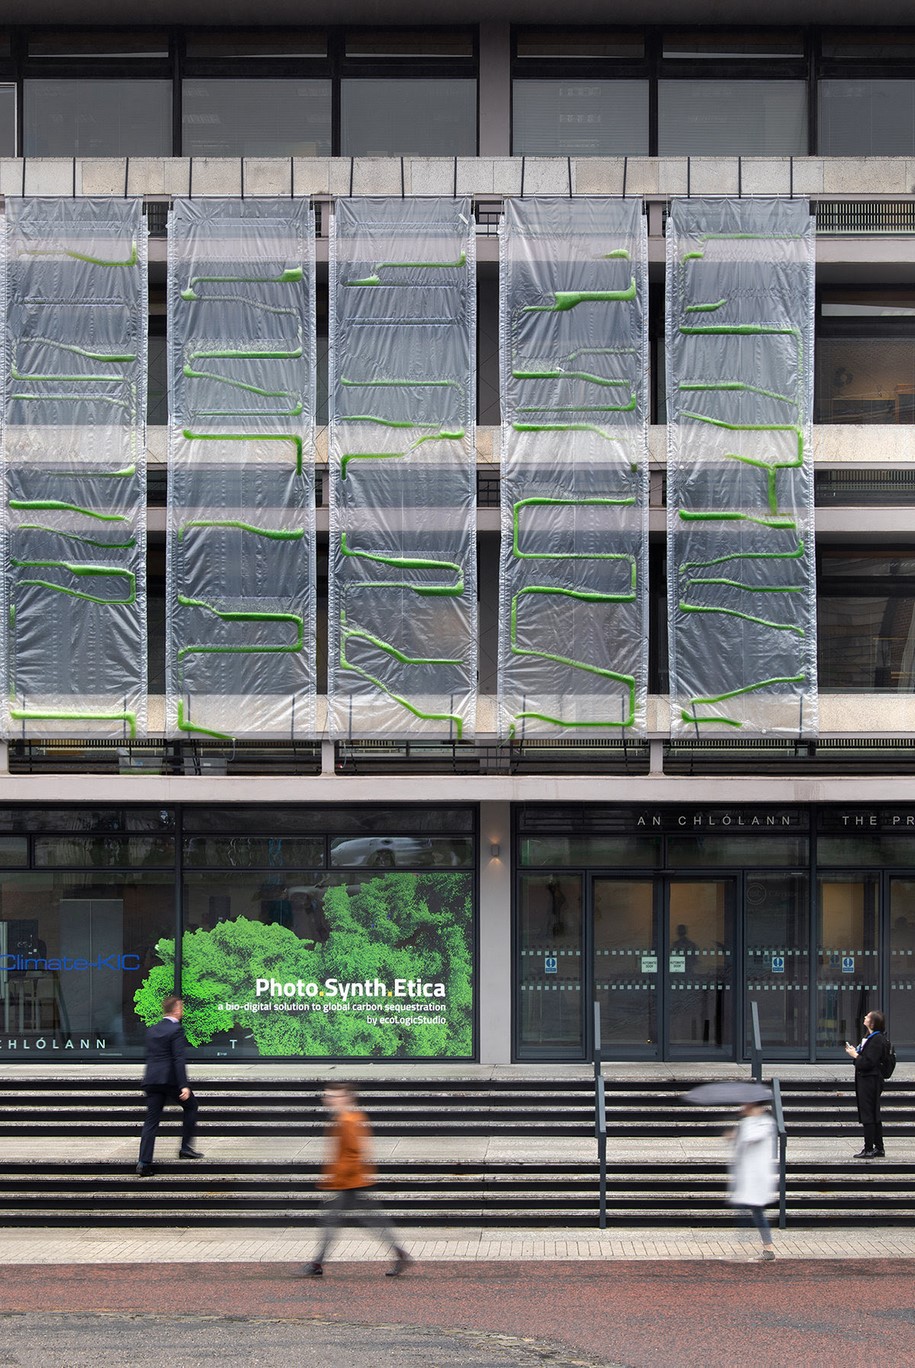 Archisearch Bio-digital urban curtain by ecoLogicStudio fights global climate change